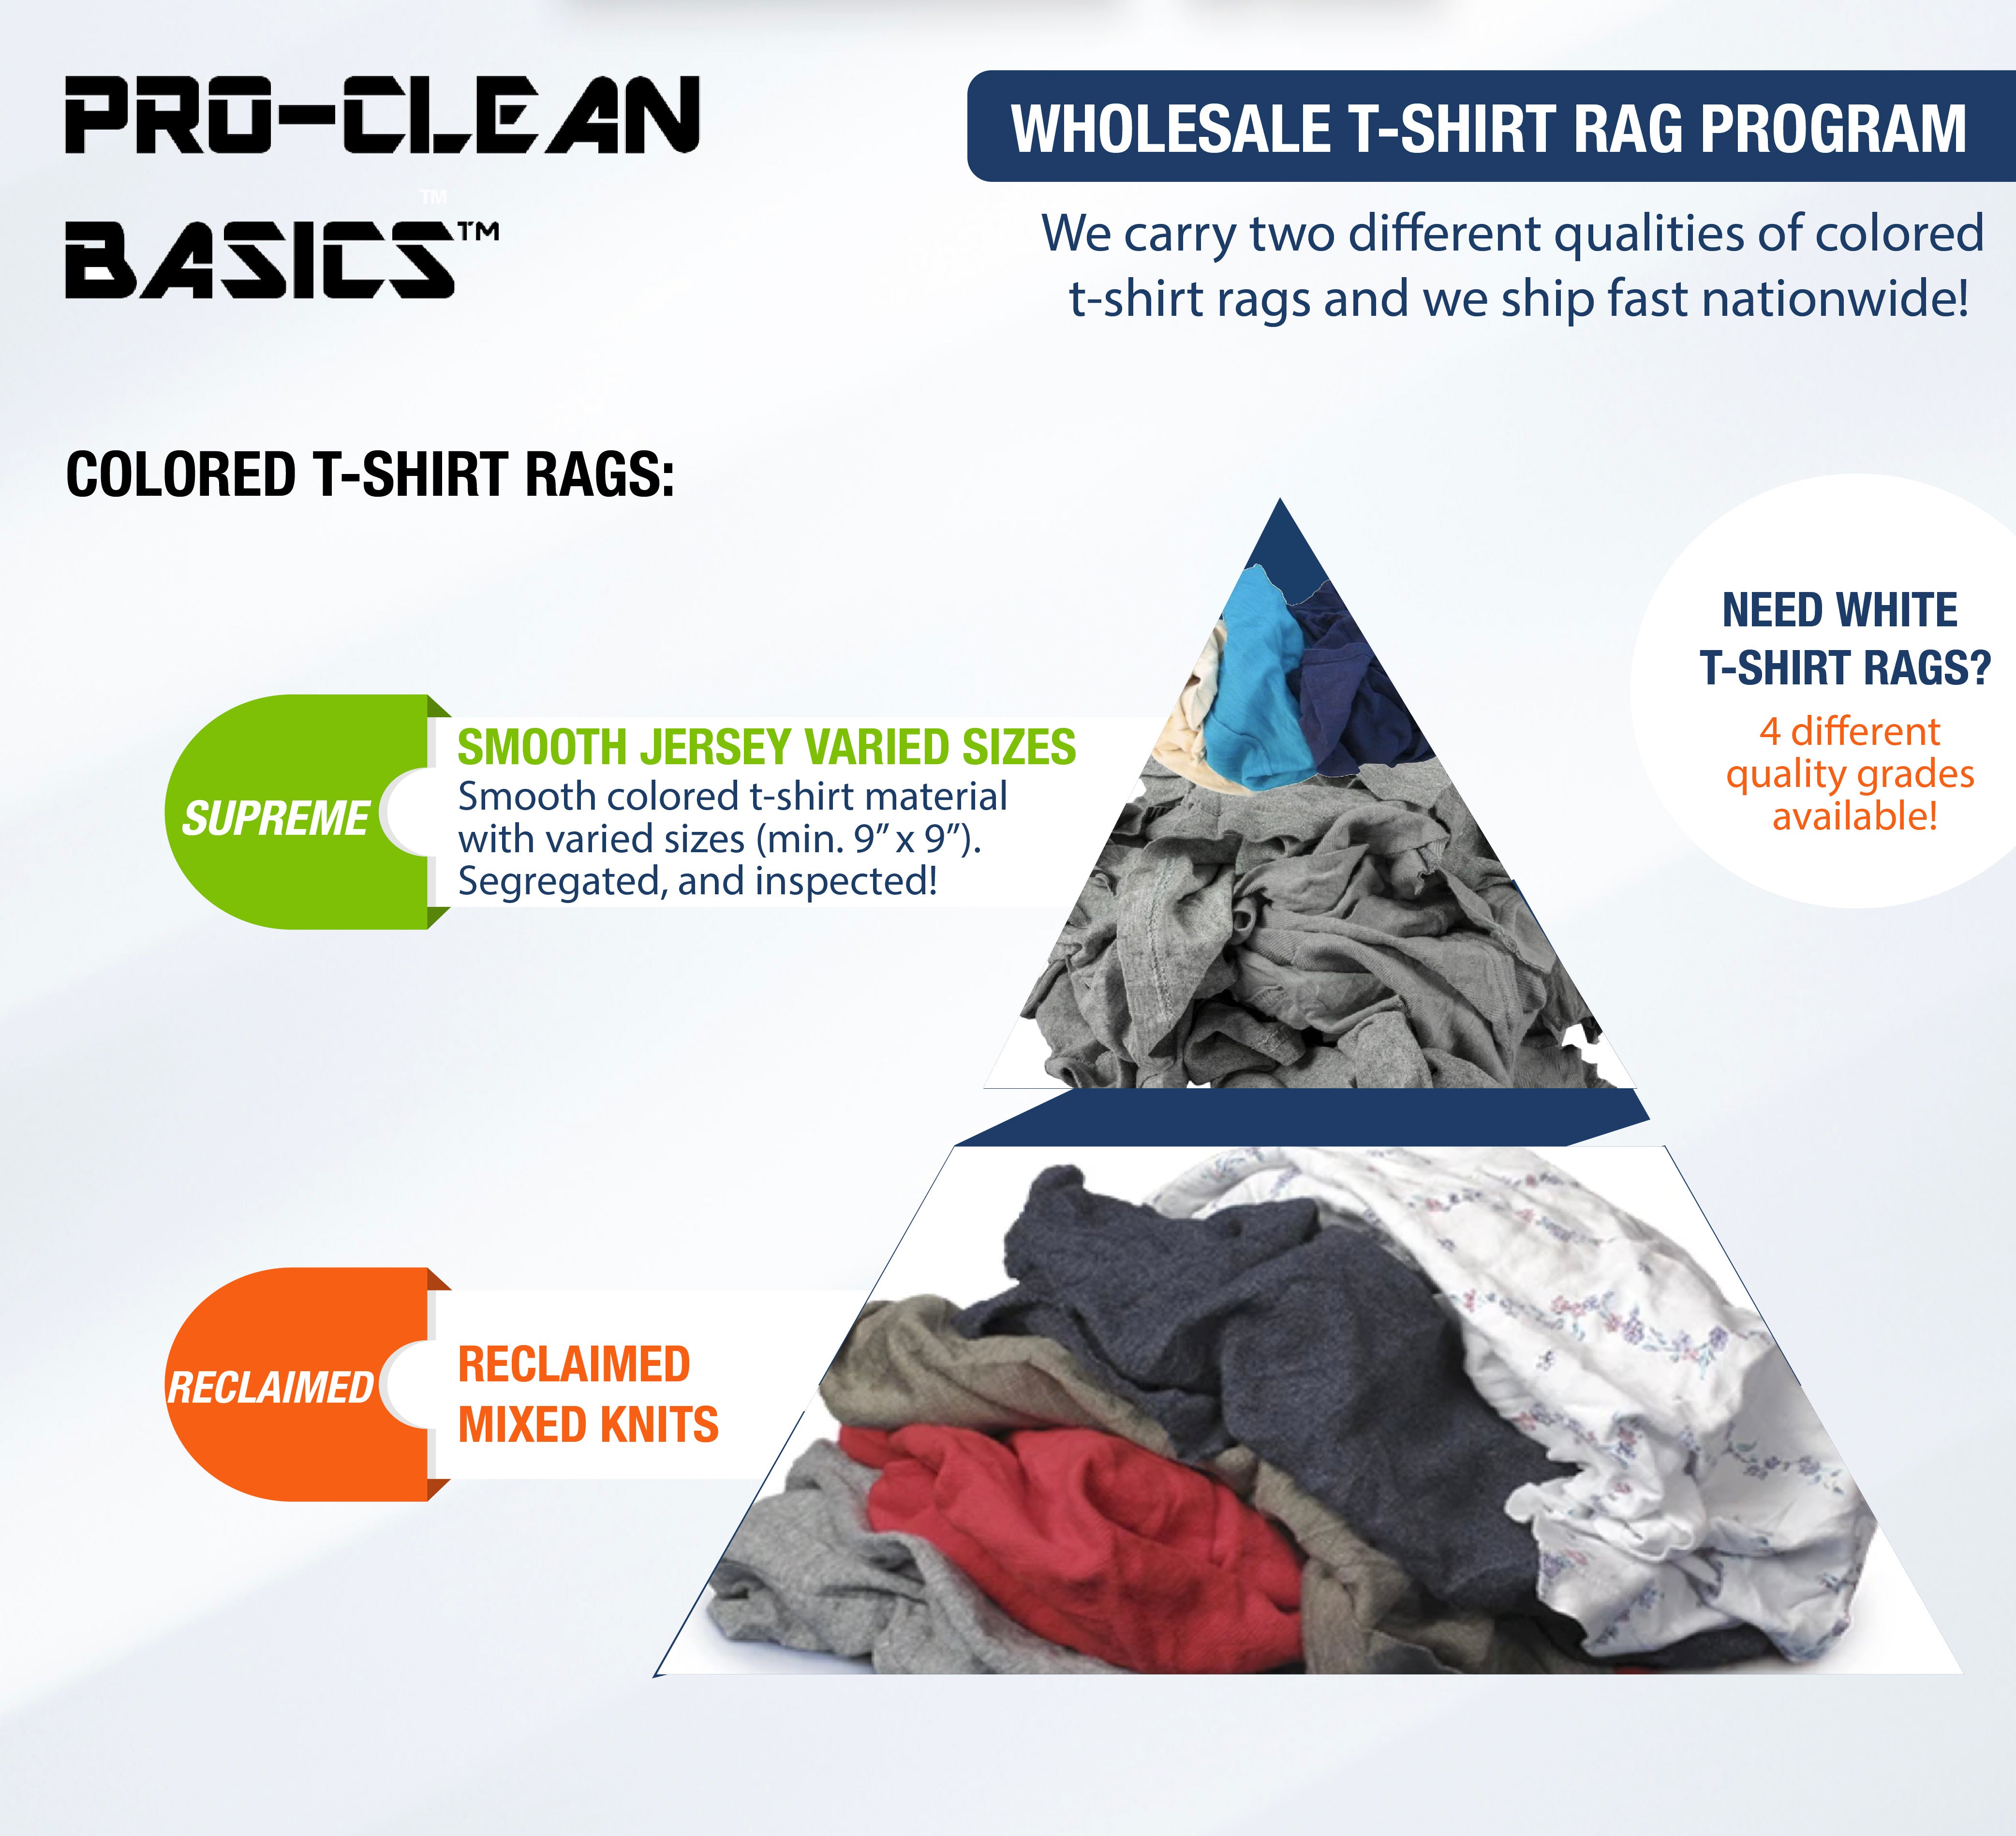 Pro-Clean Basics Supreme:  New Smooth Jersey Colored T-Shirt Rags